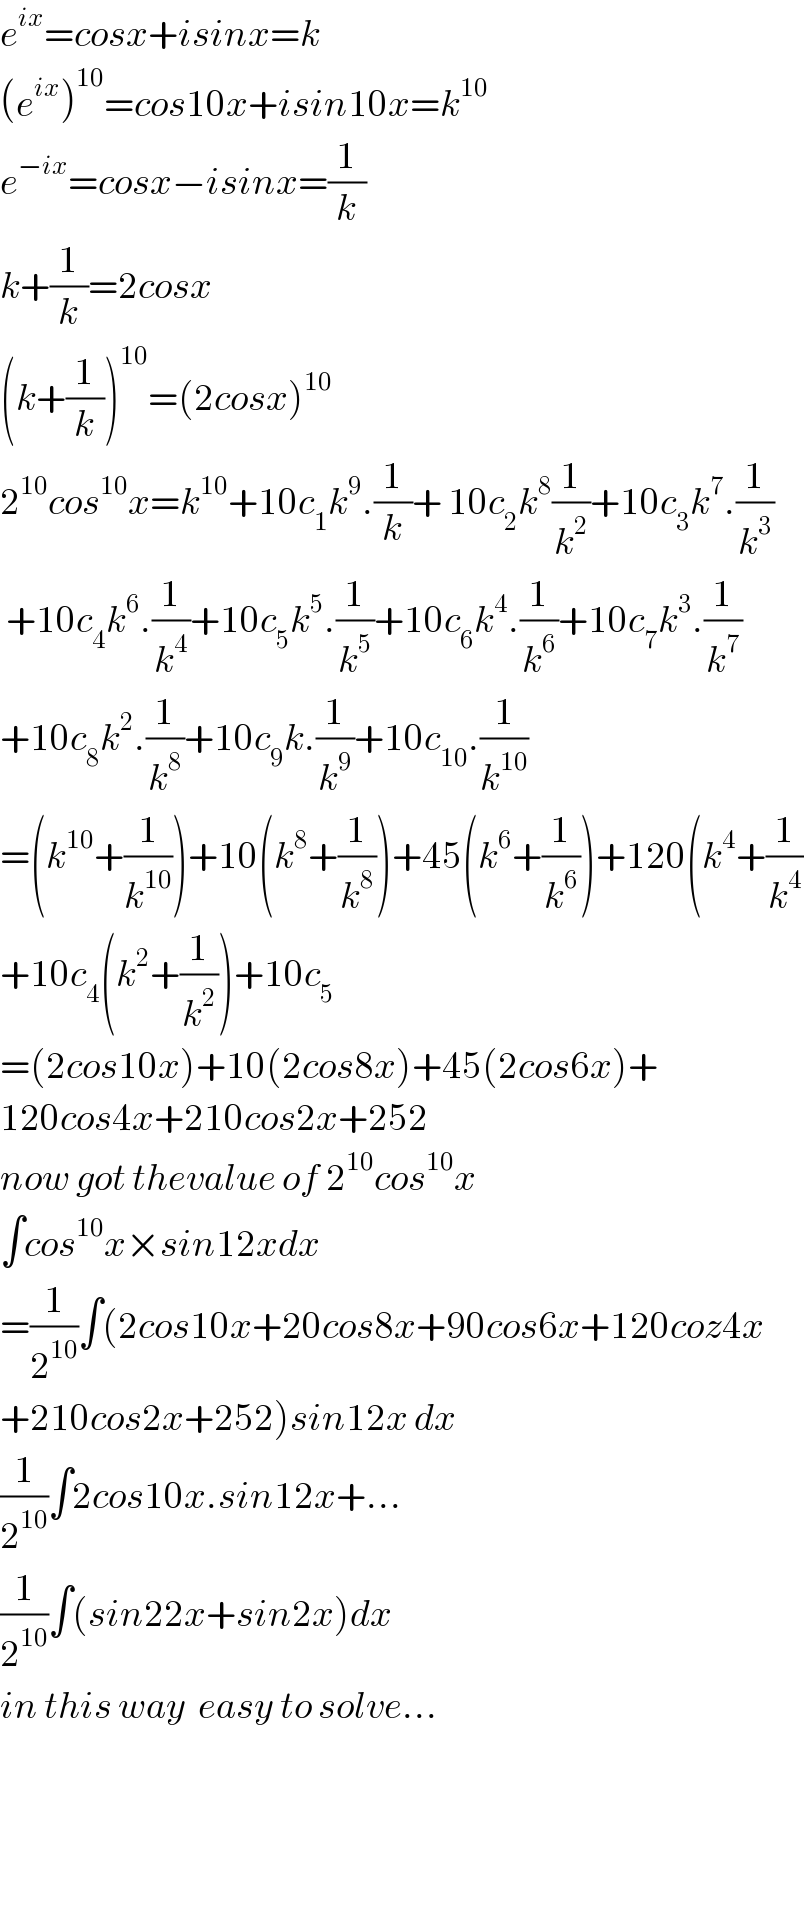 e^(ix) =cosx+isinx=k  (e^(ix) )^(10) =cos10x+isin10x=k^(10)   e^(−ix) =cosx−isinx=(1/k)  k+(1/k)=2cosx  (k+(1/k))^(10) =(2cosx)^(10)   2^(10) cos^(10) x=k^(10) +10c_1 k^9 .(1/k)+ 10c_2 k^8 (1/k^2 )+10c_3 k^7 .(1/k^3 )   +10c_4 k^6 .(1/k^4 )+10c_5 k^5 .(1/k^5 )+10c_6 k^4 .(1/k^6 )+10c_7 k^3 .(1/k^7 )  +10c_8 k^2 .(1/k^8 )+10c_9 k.(1/k^9 )+10c_(10) .(1/k^(10) )  =(k^(10) +(1/k^(10) ))+10(k^8 +(1/k^8 ))+45(k^6 +(1/k^6 ))+120(k^4 +(1/k^4 )  +10c_4 (k^2 +(1/k^2 ))+10c_5   =(2cos10x)+10(2cos8x)+45(2cos6x)+  120cos4x+210cos2x+252  now got thevalue of 2^(10) cos^(10) x  ∫cos^(10) x×sin12xdx  =(1/2^(10) )∫(2cos10x+20cos8x+90cos6x+120coz4x  +210cos2x+252)sin12x dx  (1/2^(10) )∫2cos10x.sin12x+...  (1/2^(10) )∫(sin22x+sin2x)dx  in this way  easy to solve...        